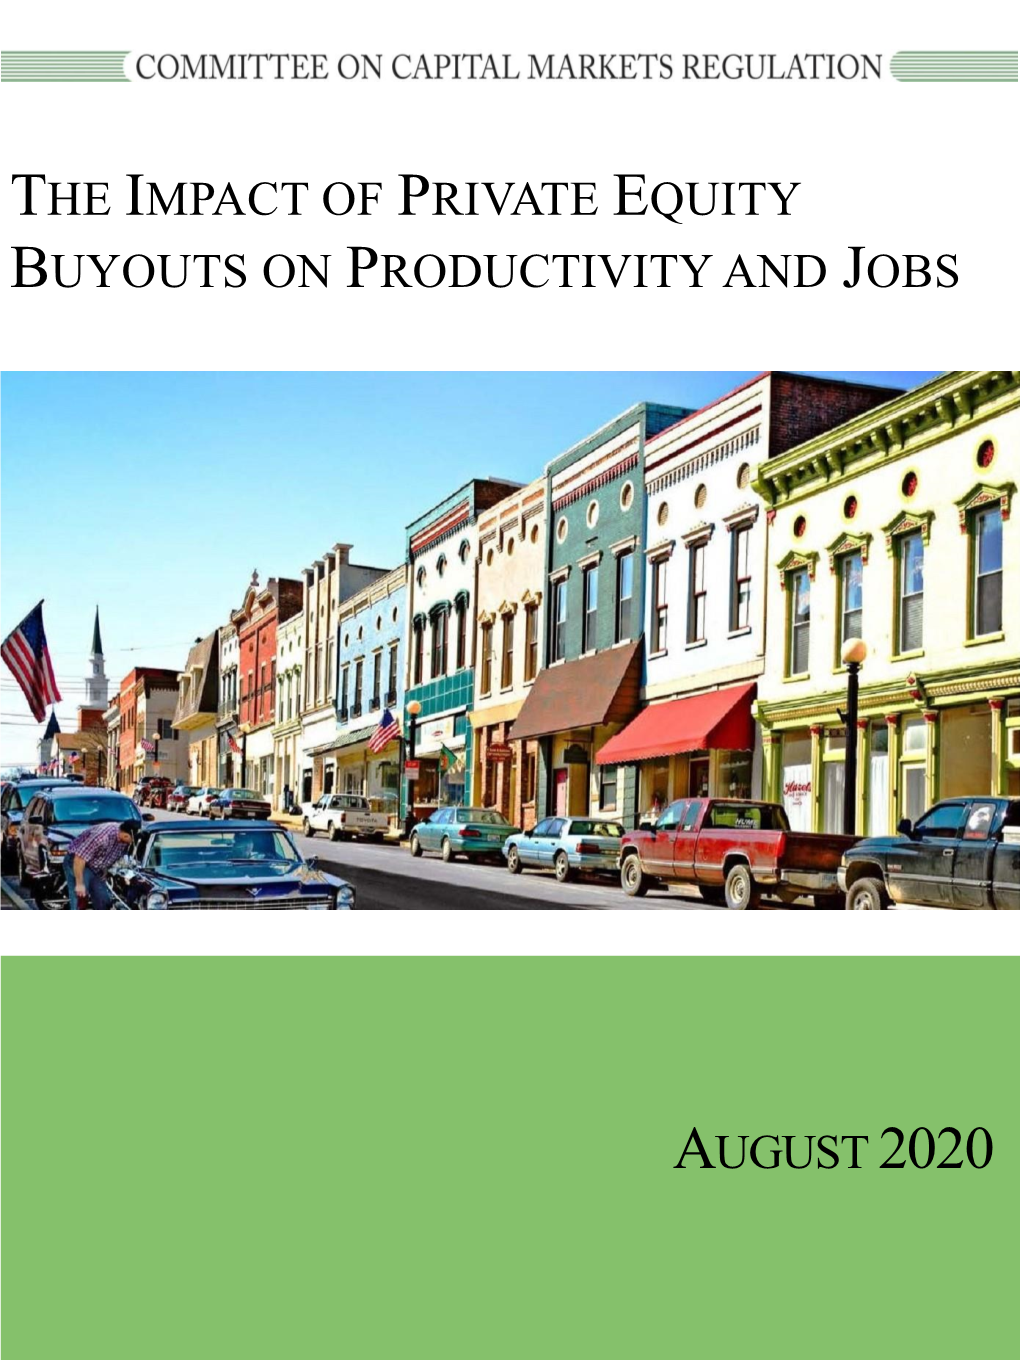 The Impact of Private Equity Buyouts on Productivity and Jobs